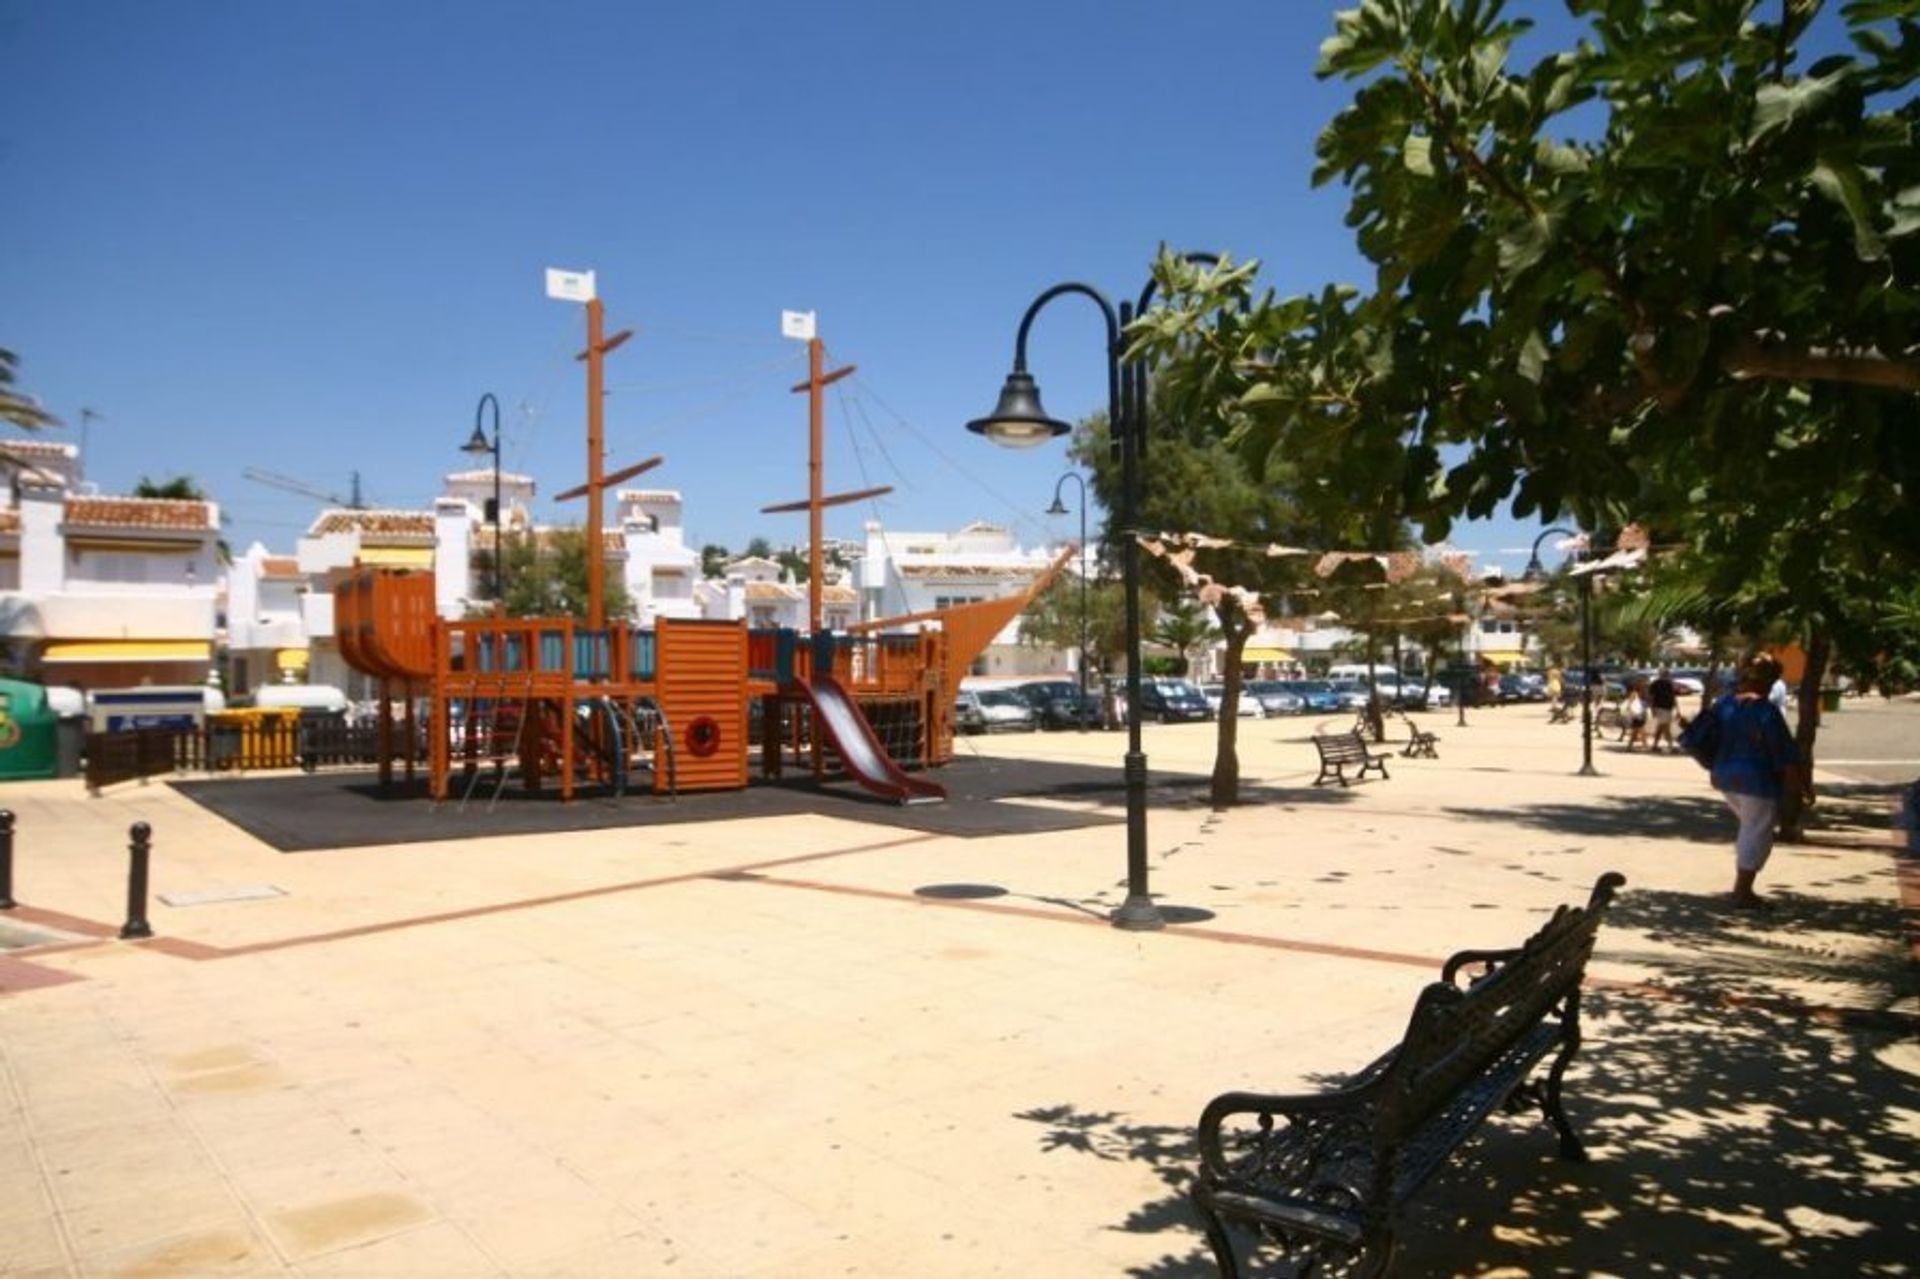 Explore Riviera del Sol's centre lively with shops, bars, restaurants and play areas